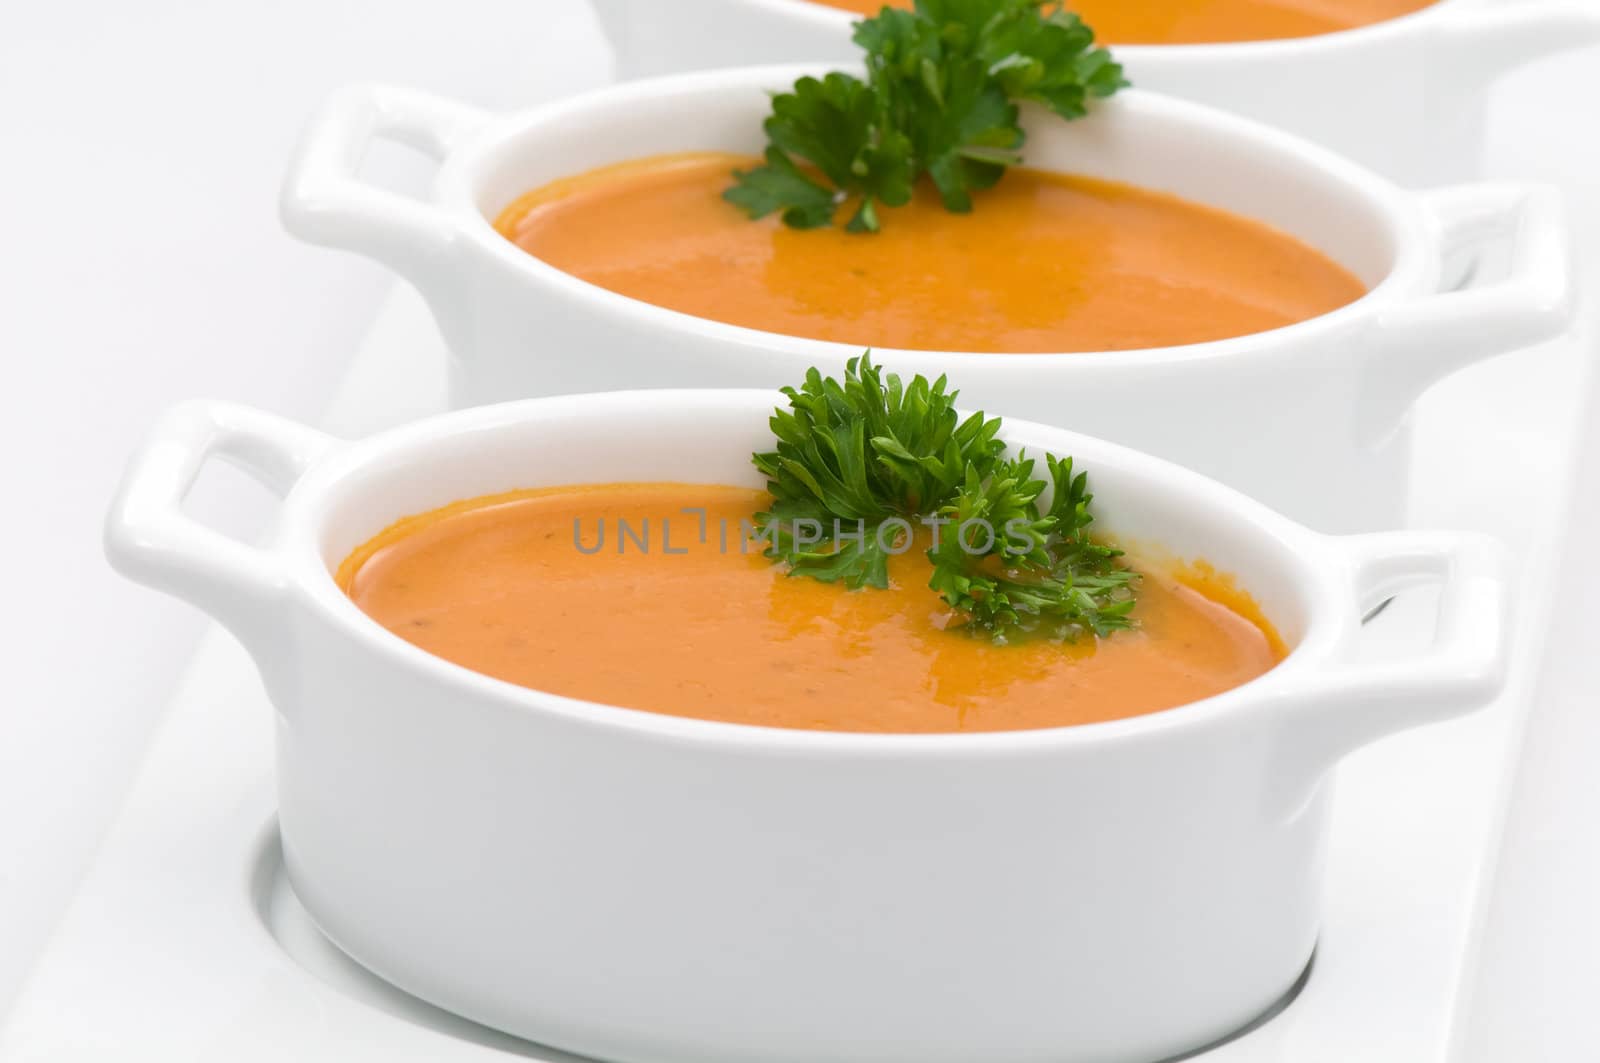 Bowls of vegetable soup by Hbak